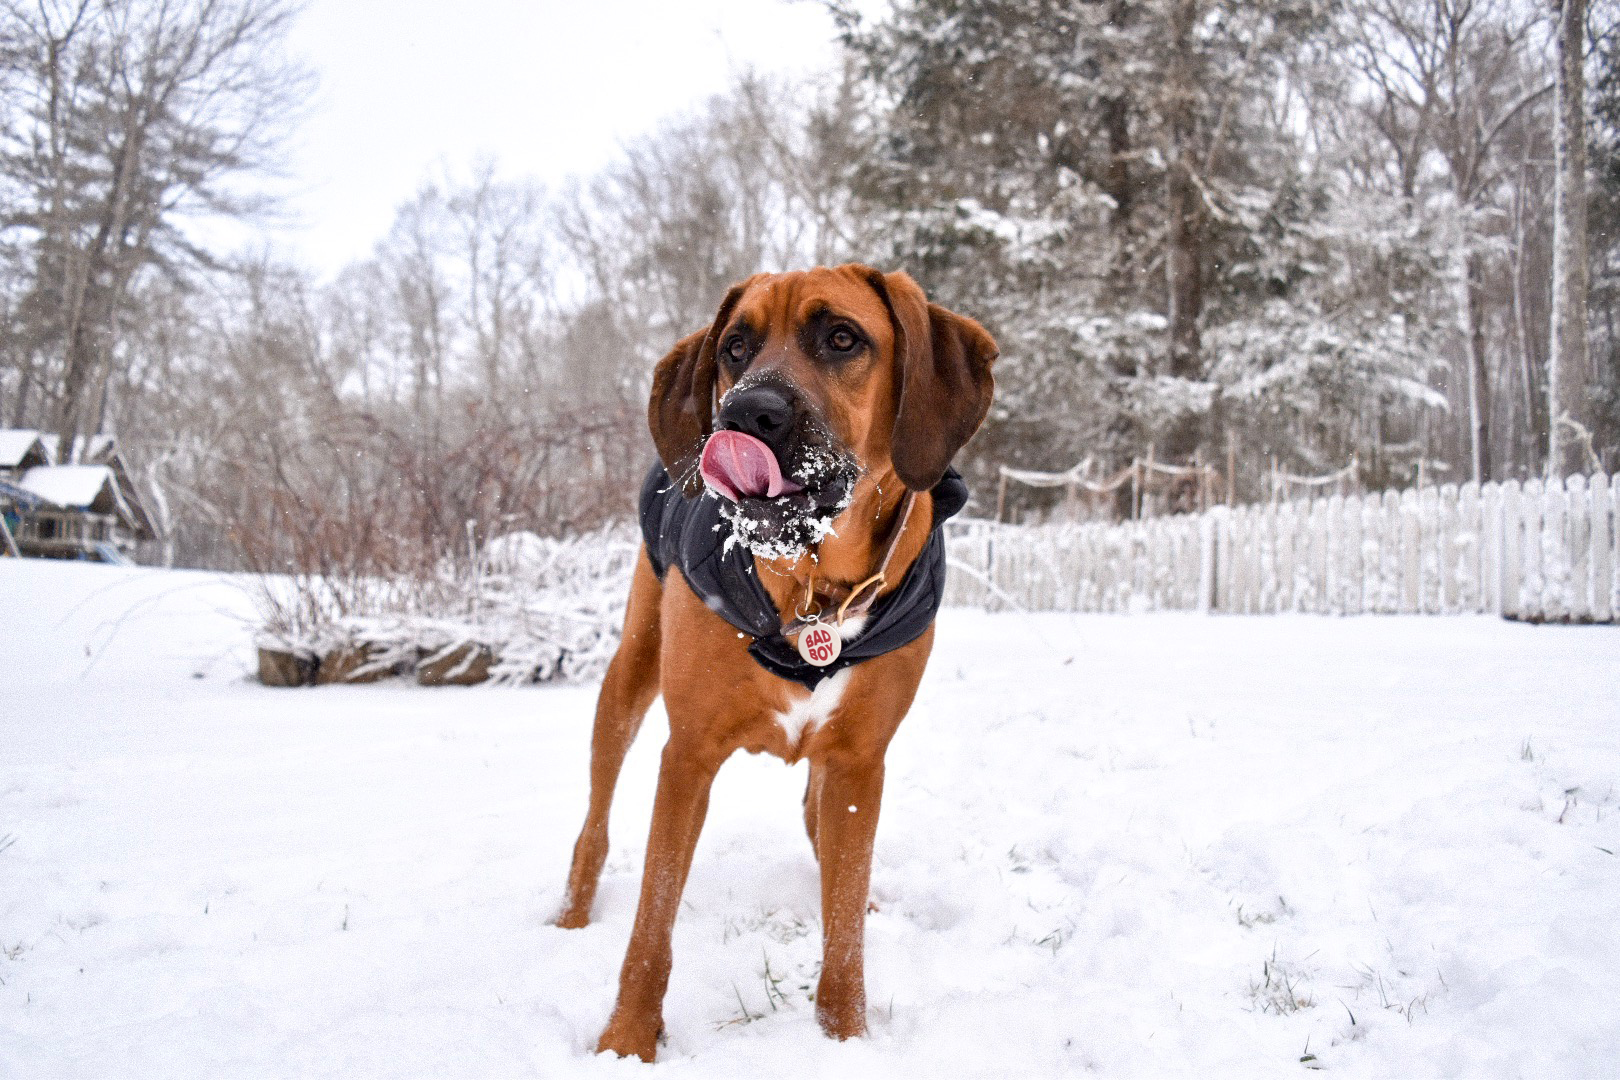 Dogs & Cold Weather: How to Protect Your Pup During the Winter Months